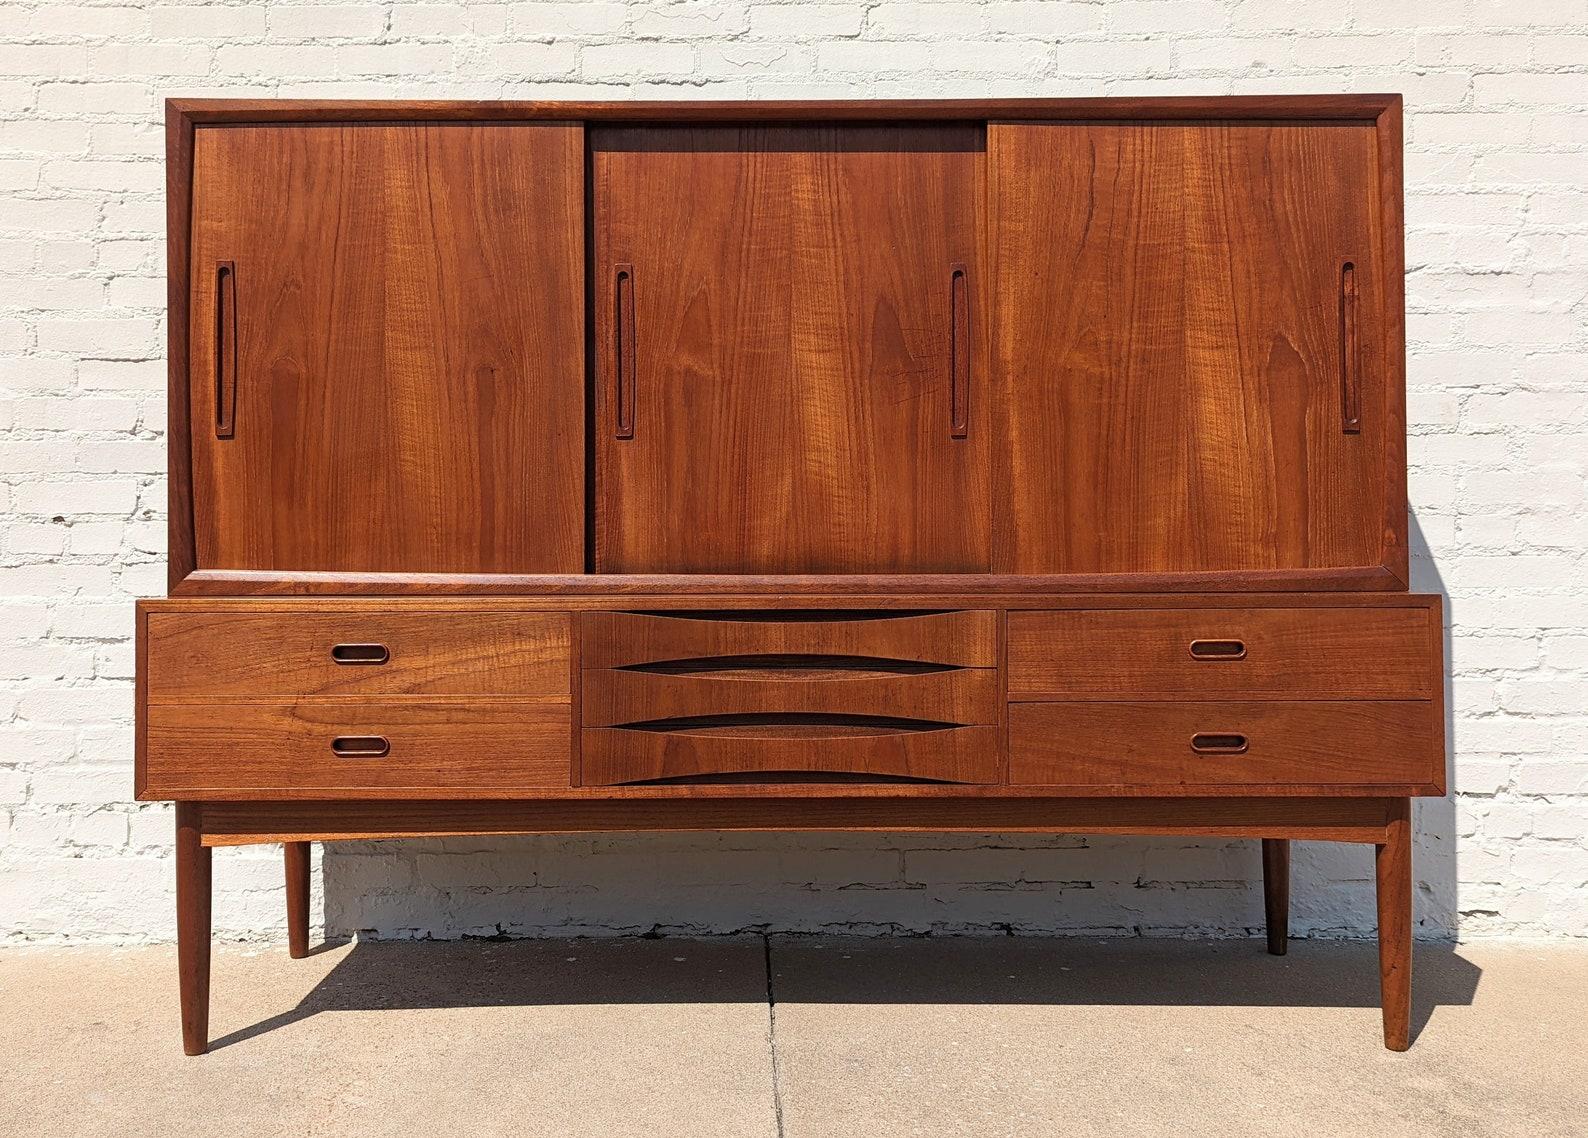 Mid Century Danish Modern Teak Cocktail Cabinet

Average vintage condition and structurally sound. Has some expected finish wear, scratching, and edge dings. Beautifully crafted piece with some visible use. One of the sliding doors has some slight